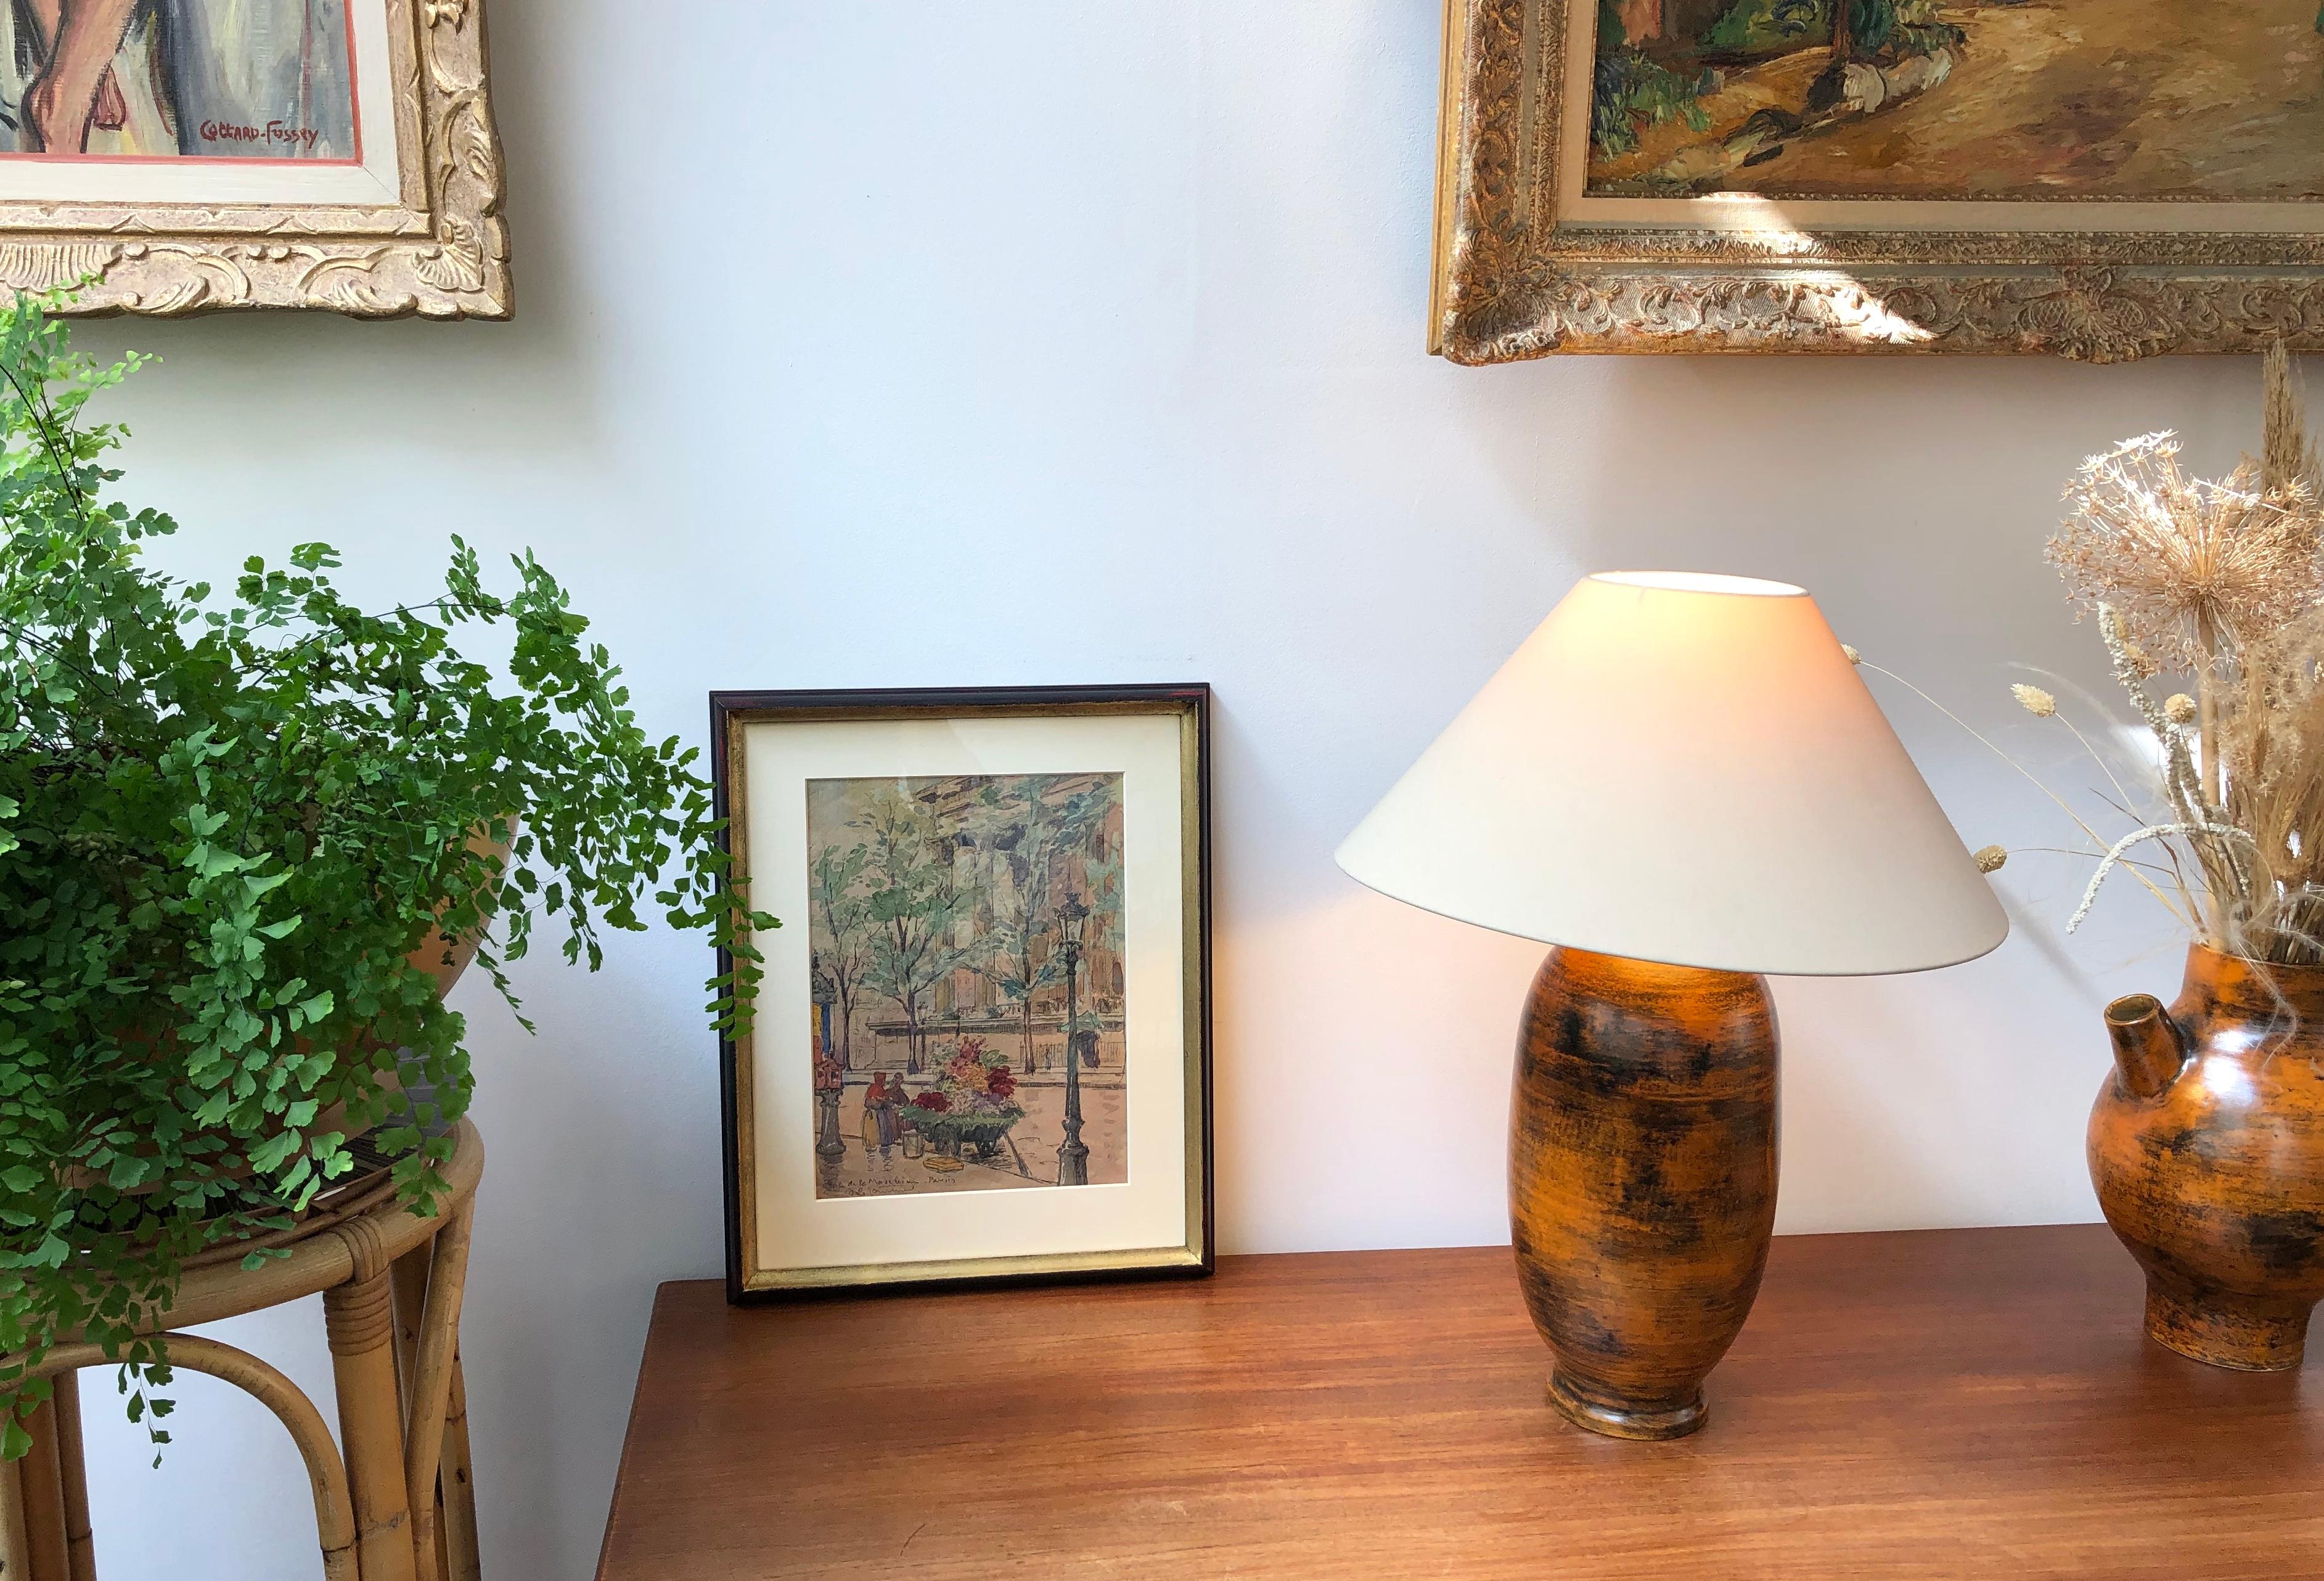 Midcentury ceramic table lamp (circa 1950s) by Jacques Blin. This beautifully rust-colored French lamp (circa 1950s) is devoid of Blin's characteristic sgraffito-etchings on its surface. It is exquisite, smooth and tactile and oozes charm. In very